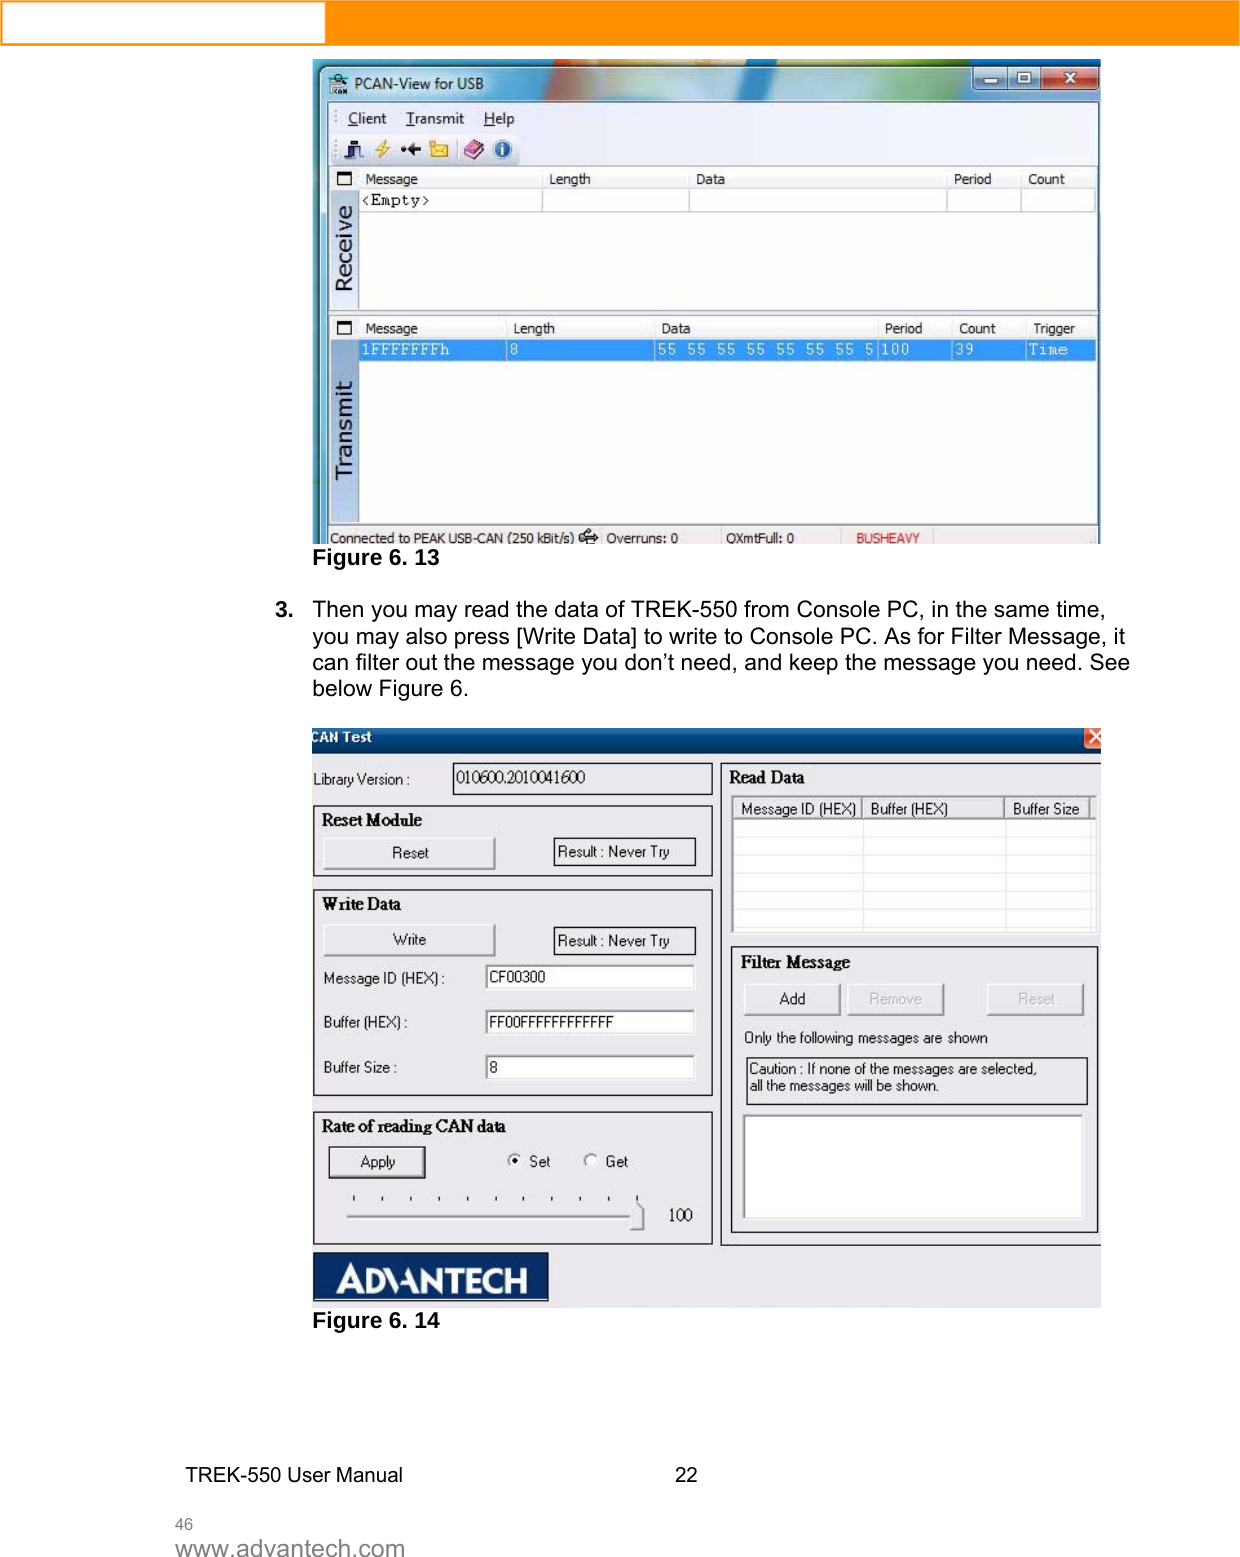  46 www.advantech.com  Figure 6. 13  3.  Then you may read the data of TREK-550 from Console PC, in the same time, you may also press [Write Data] to write to Console PC. As for Filter Message, it can filter out the message you don’t need, and keep the message you need. See below Figure 6.     Figure 6. 14      TREK-550 User Manual22  